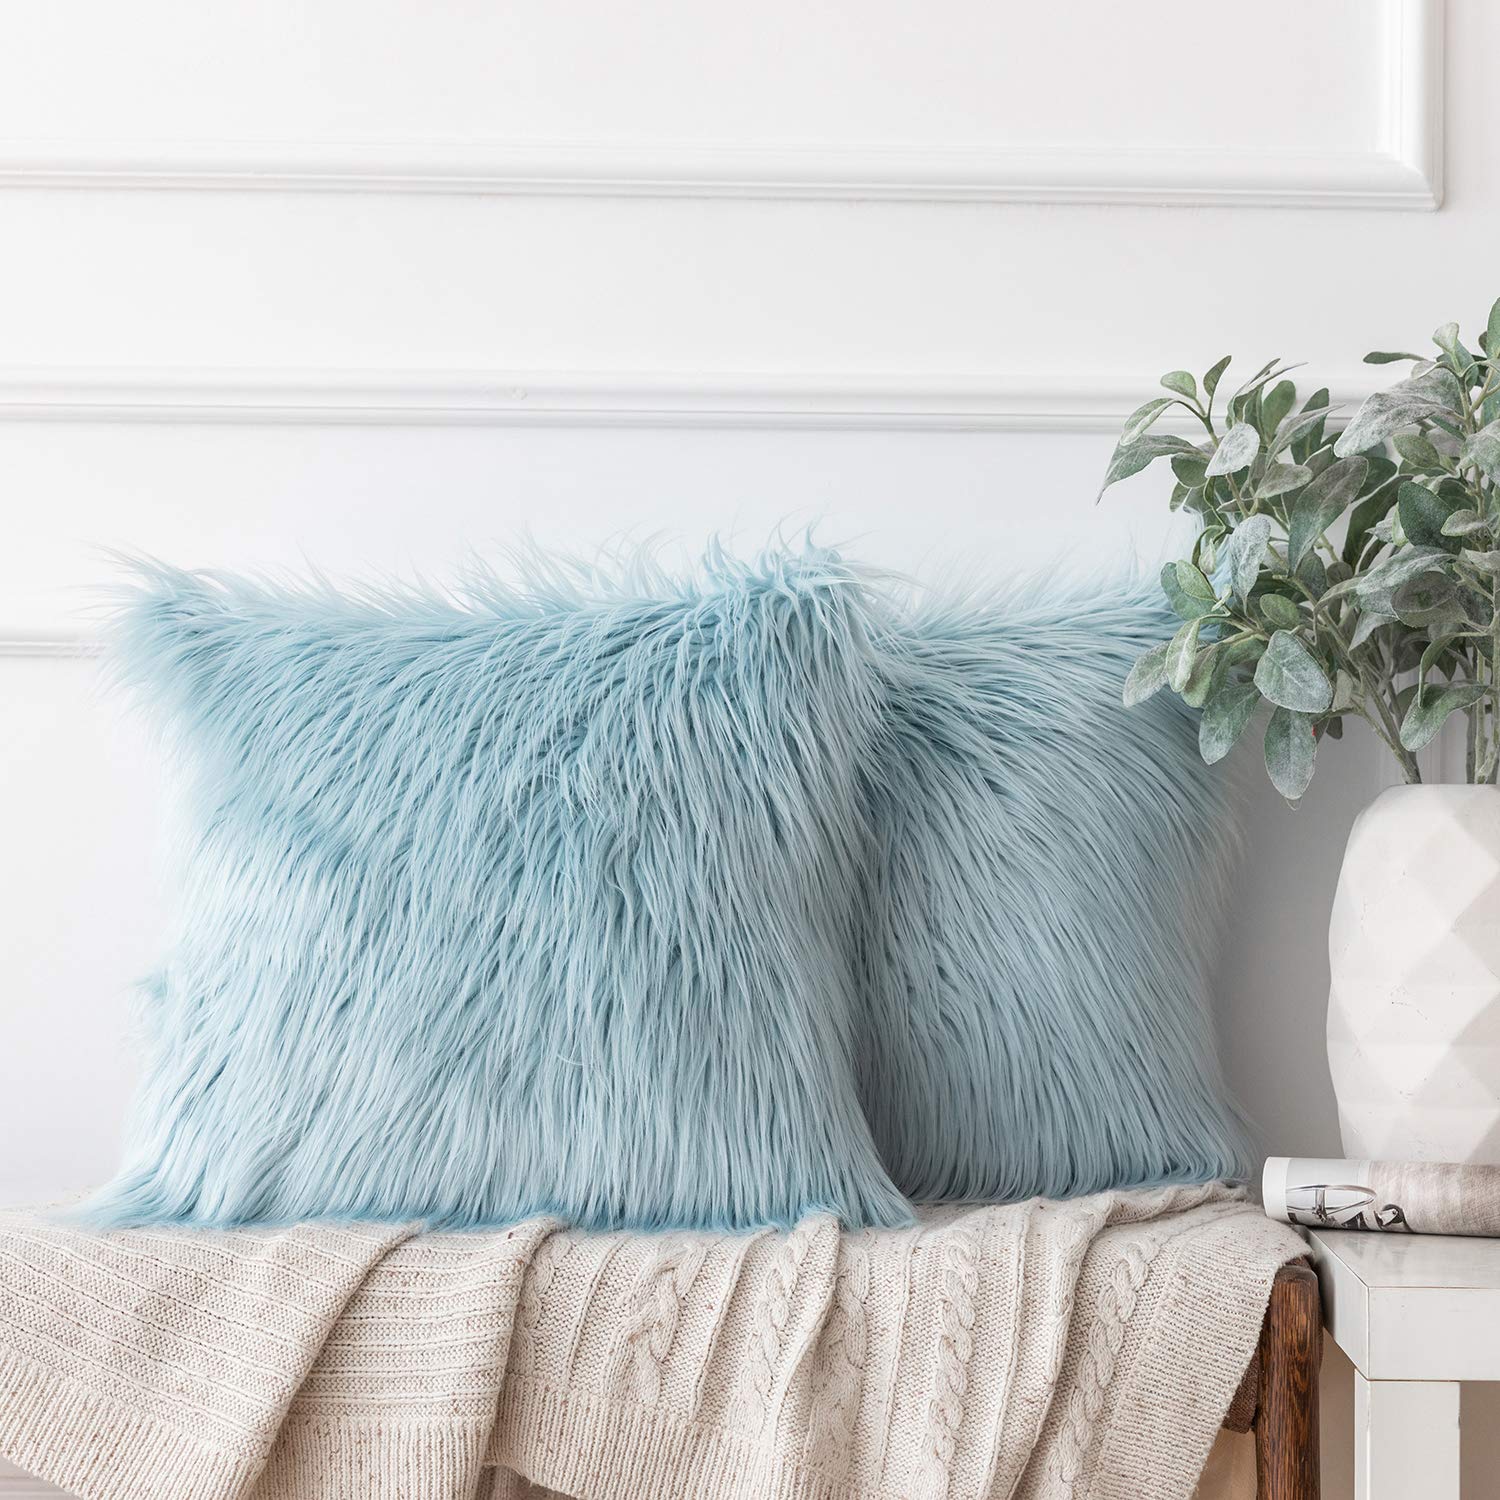 Book Cover Ashler Faux Fur Pillow Covers，Pack of 2 Decorative Luxury Style Light Blue Faux Fur Throw Pillow Case Cushion Cover 18 x 18 Inches 45 x 45 cm Light Blue 18'' X 18''